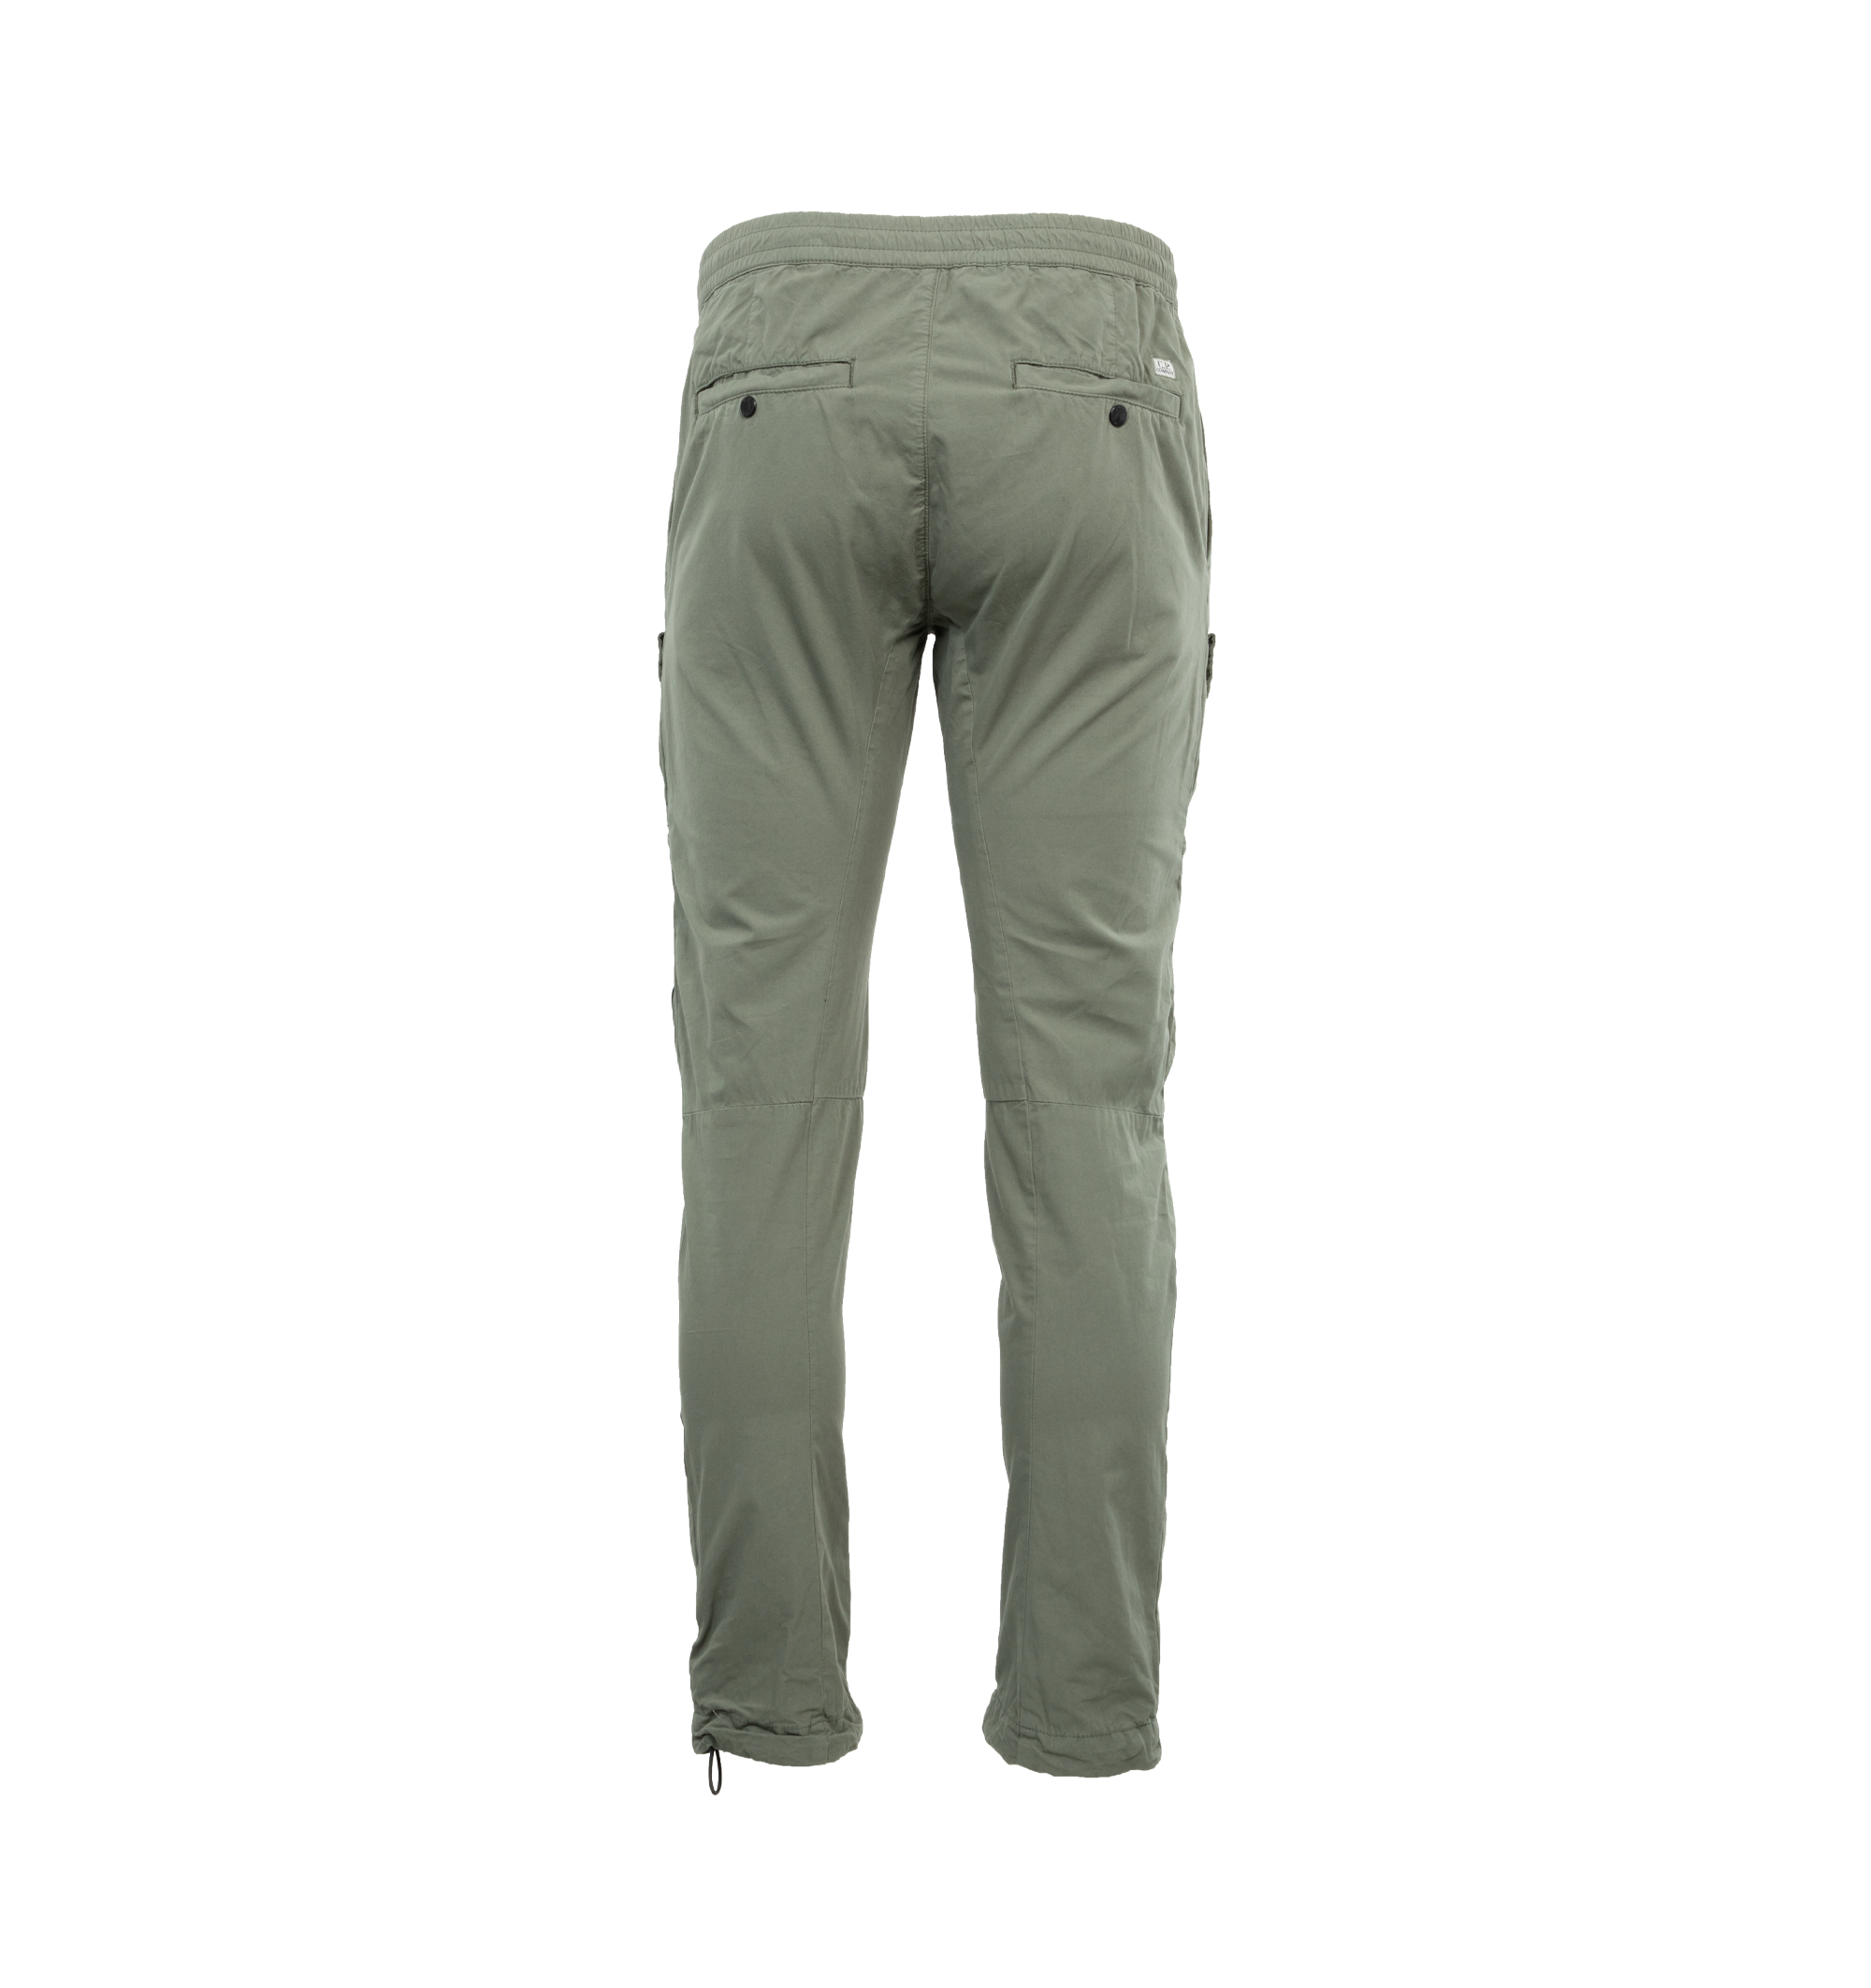 Buy MENS CARGO 6 POCKETS TRACK PANTS Online In India At Discounted Prices